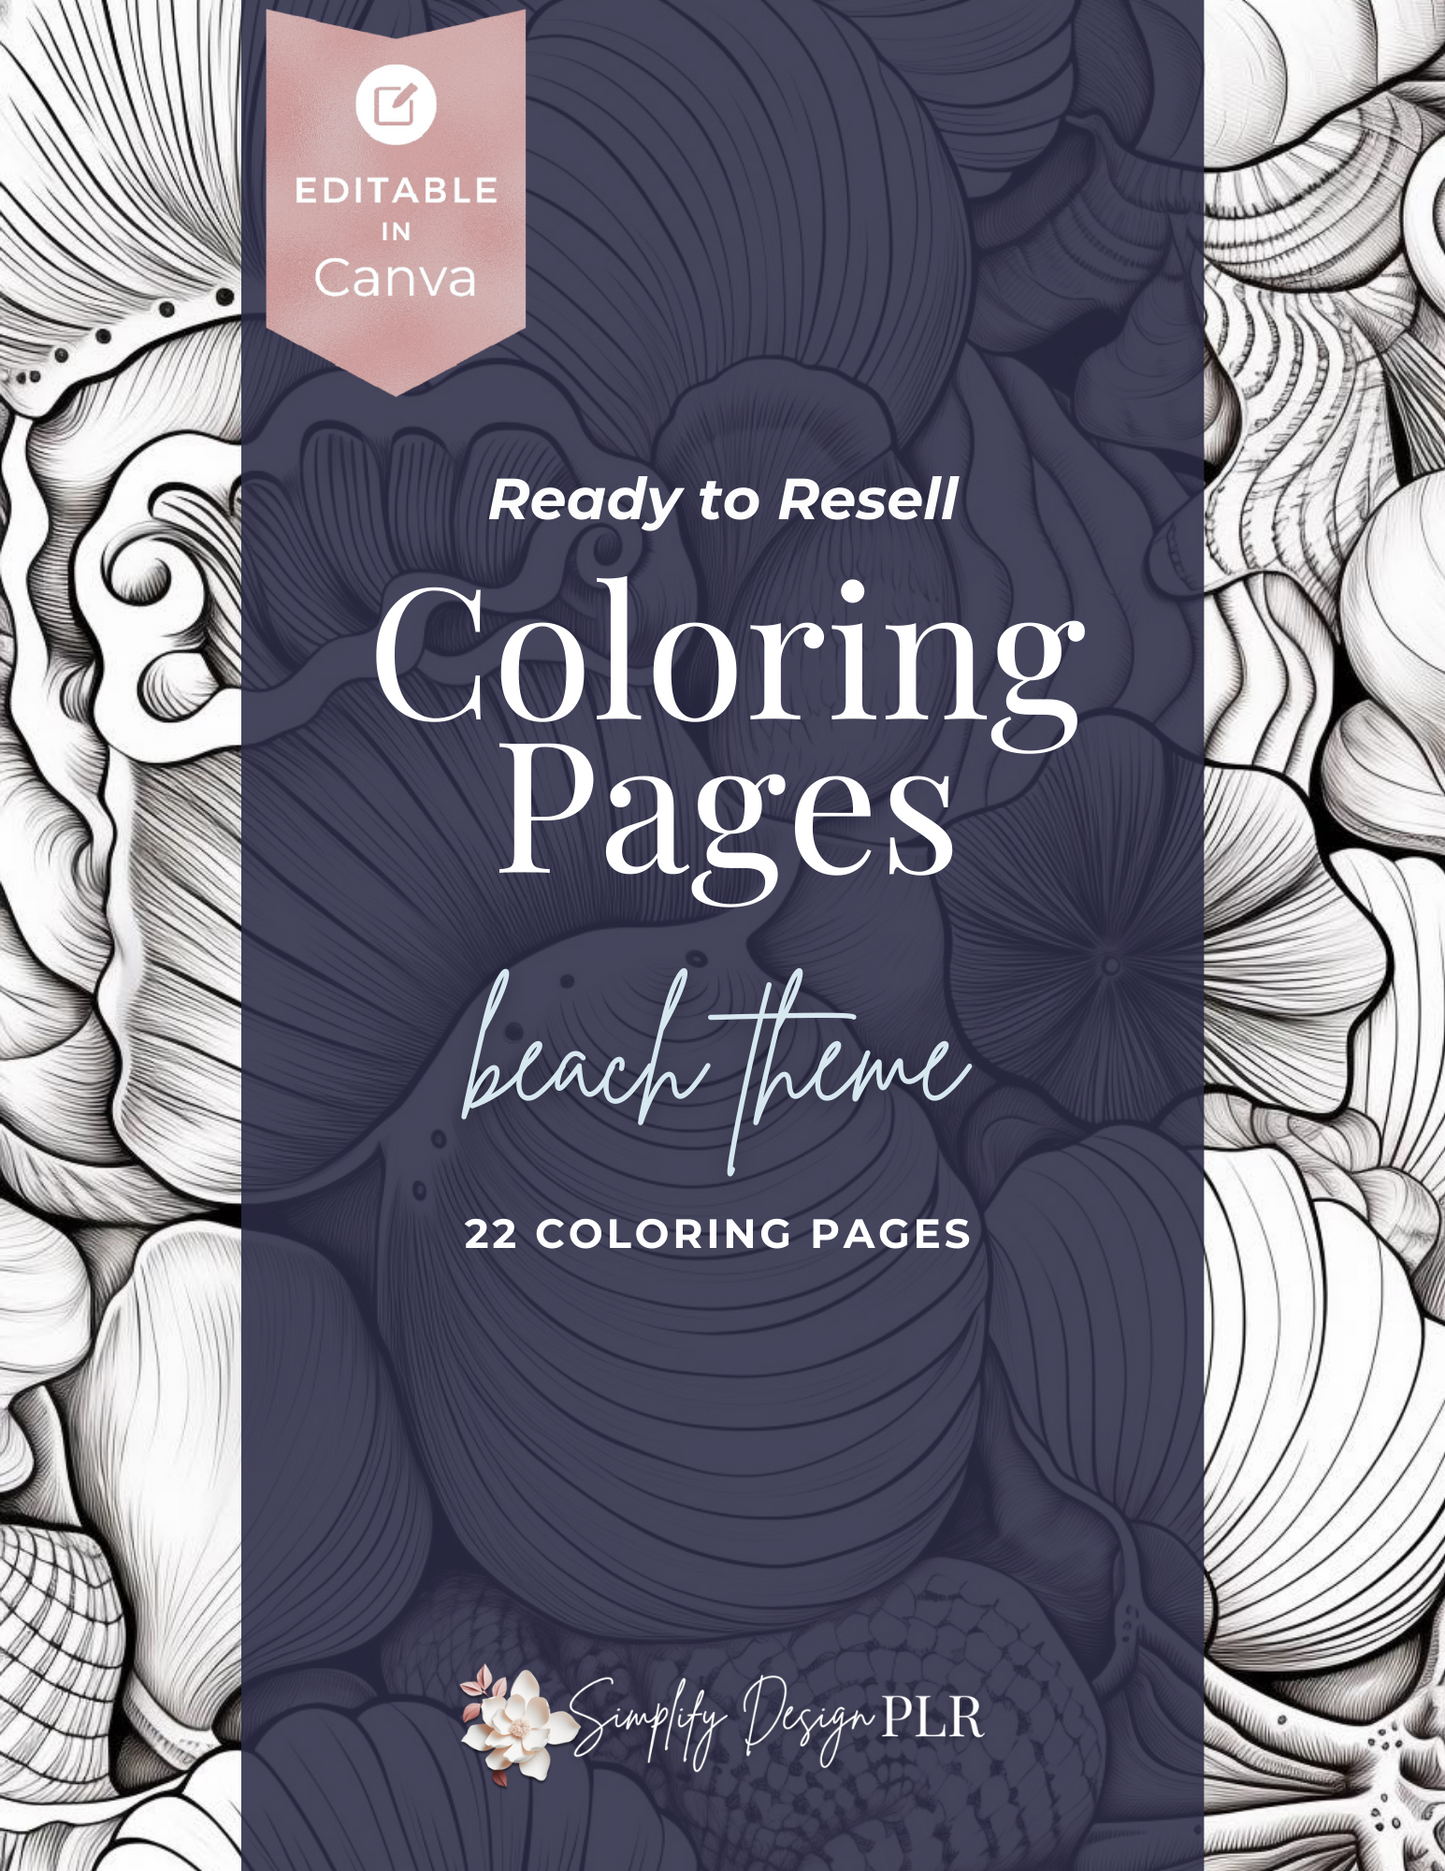 Ready to Resell Coloring Pages: Beach Theme